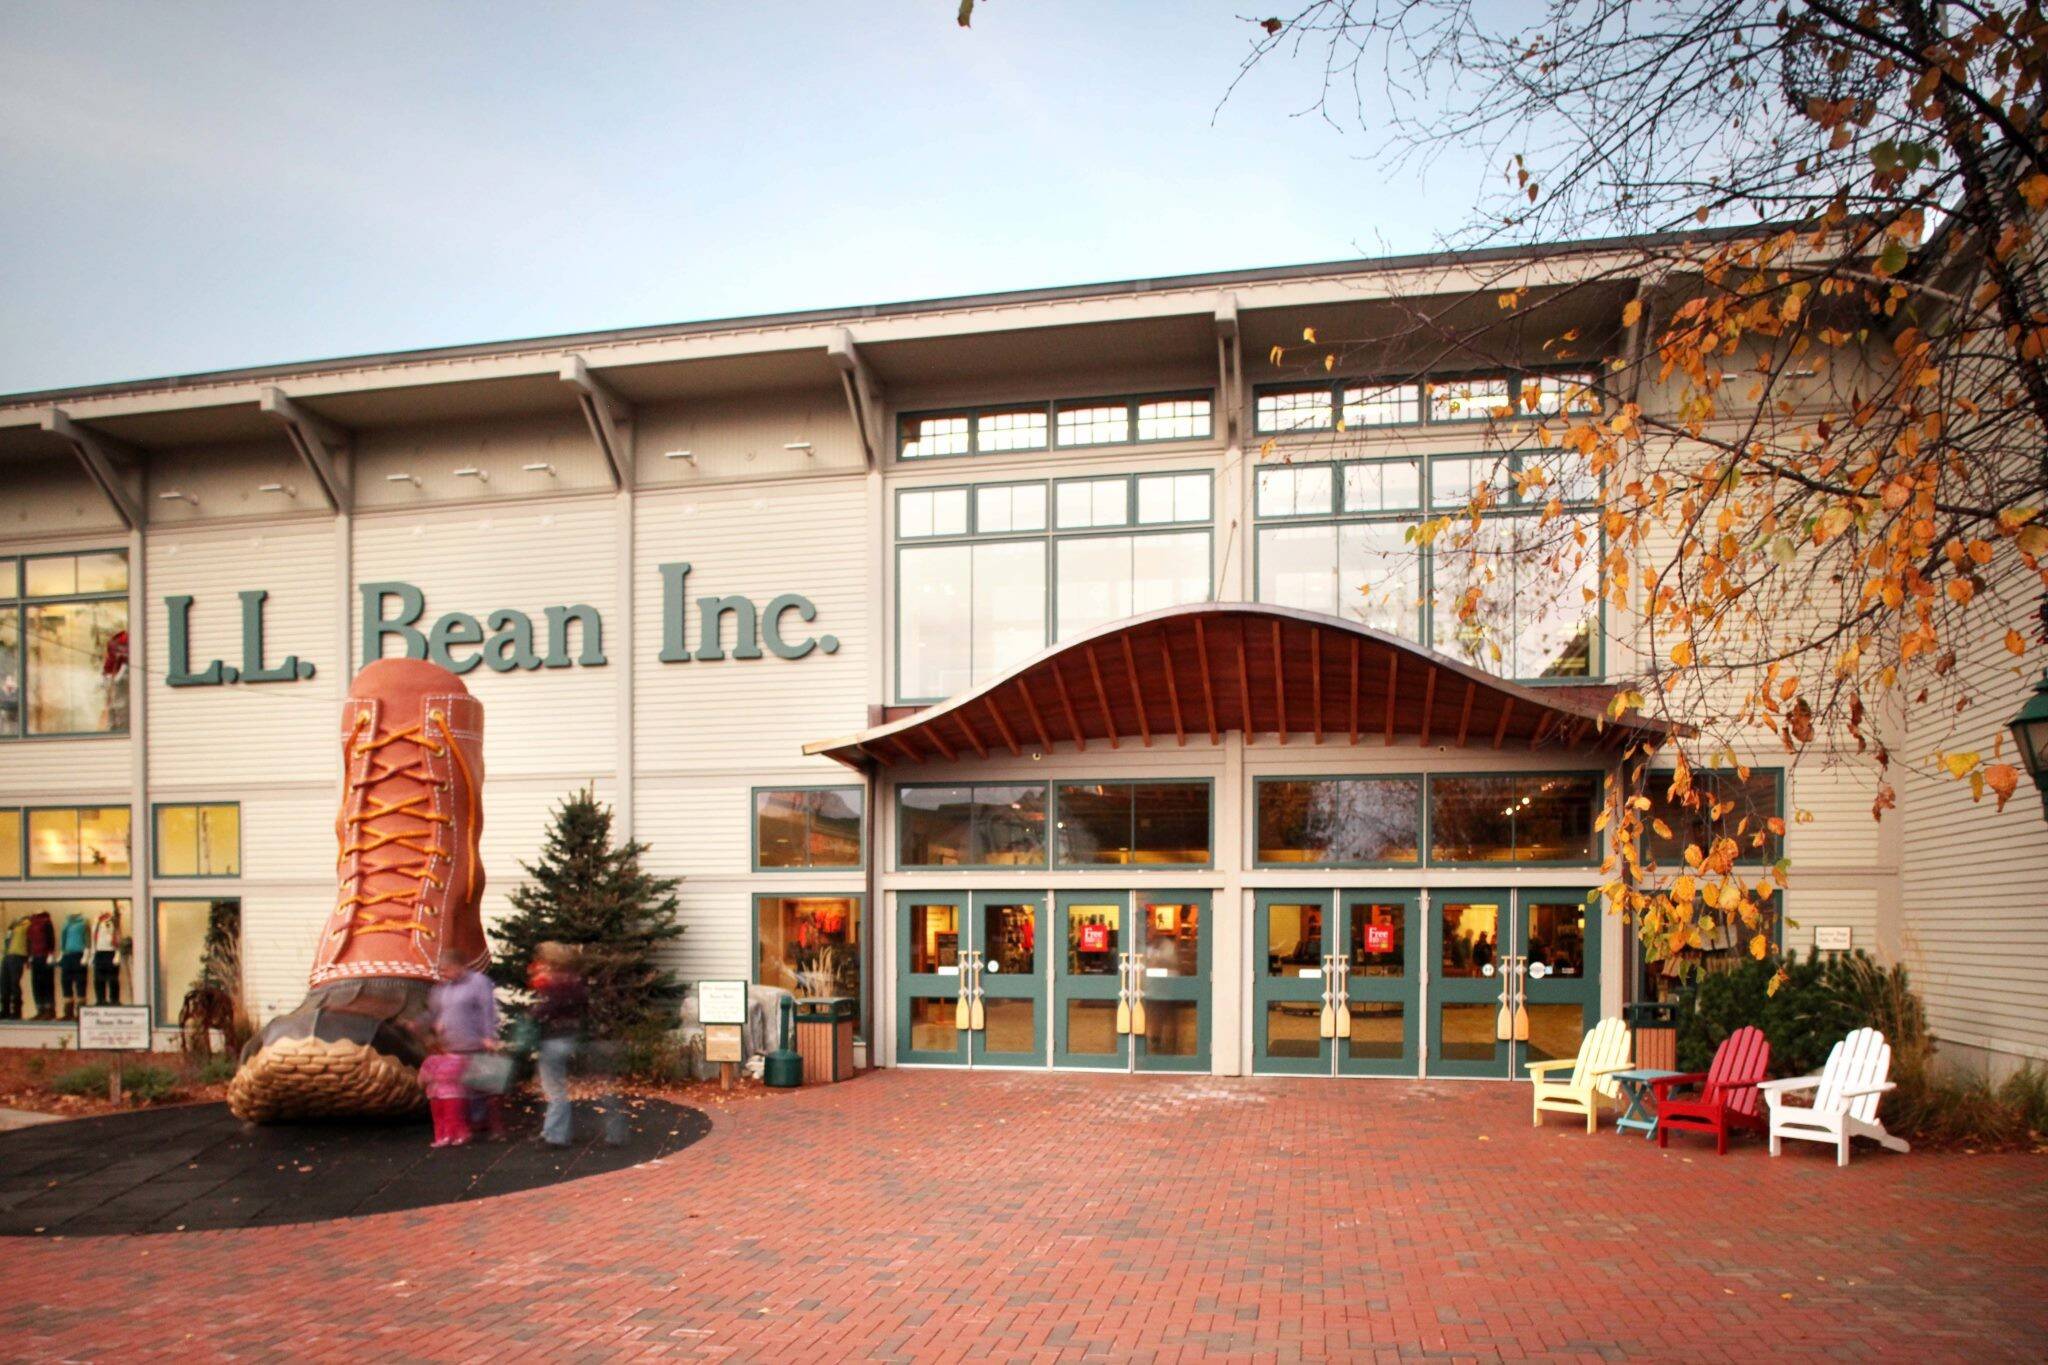 L.L. Bean is opening their first Canadian location near ...